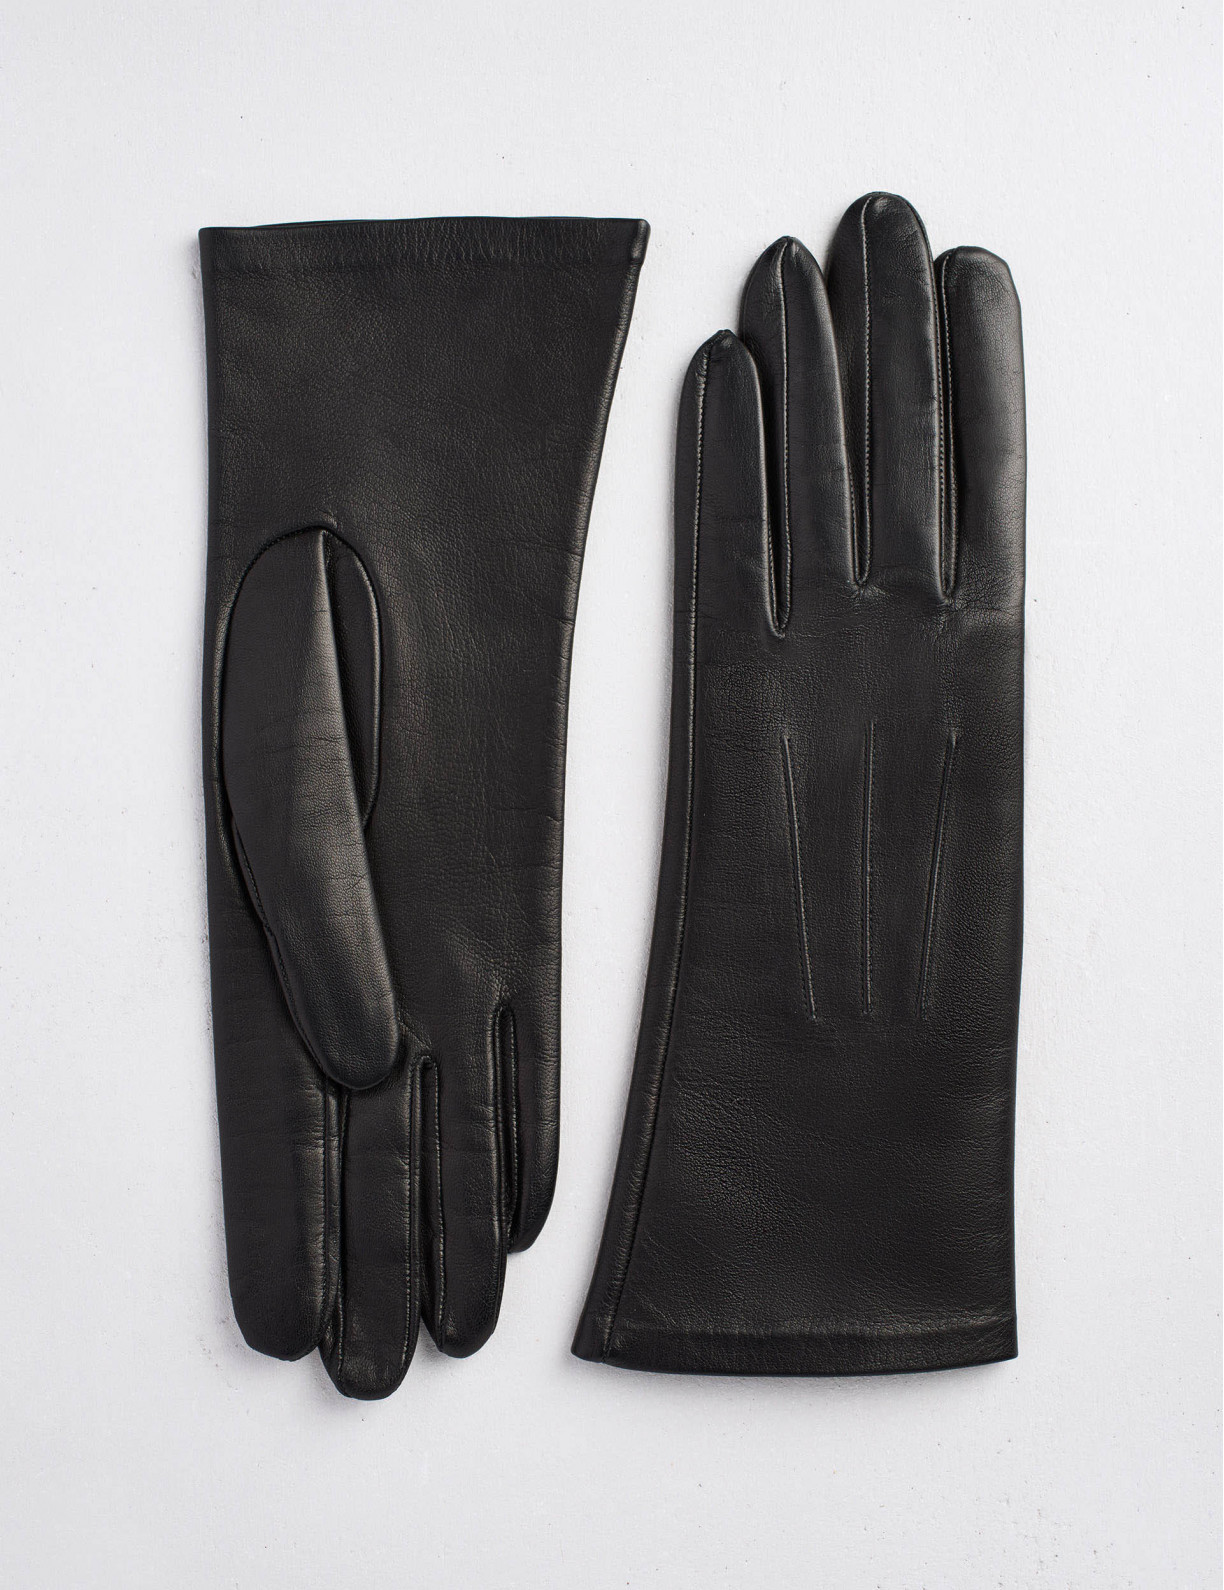 16.03 Classic gloves with three ribs